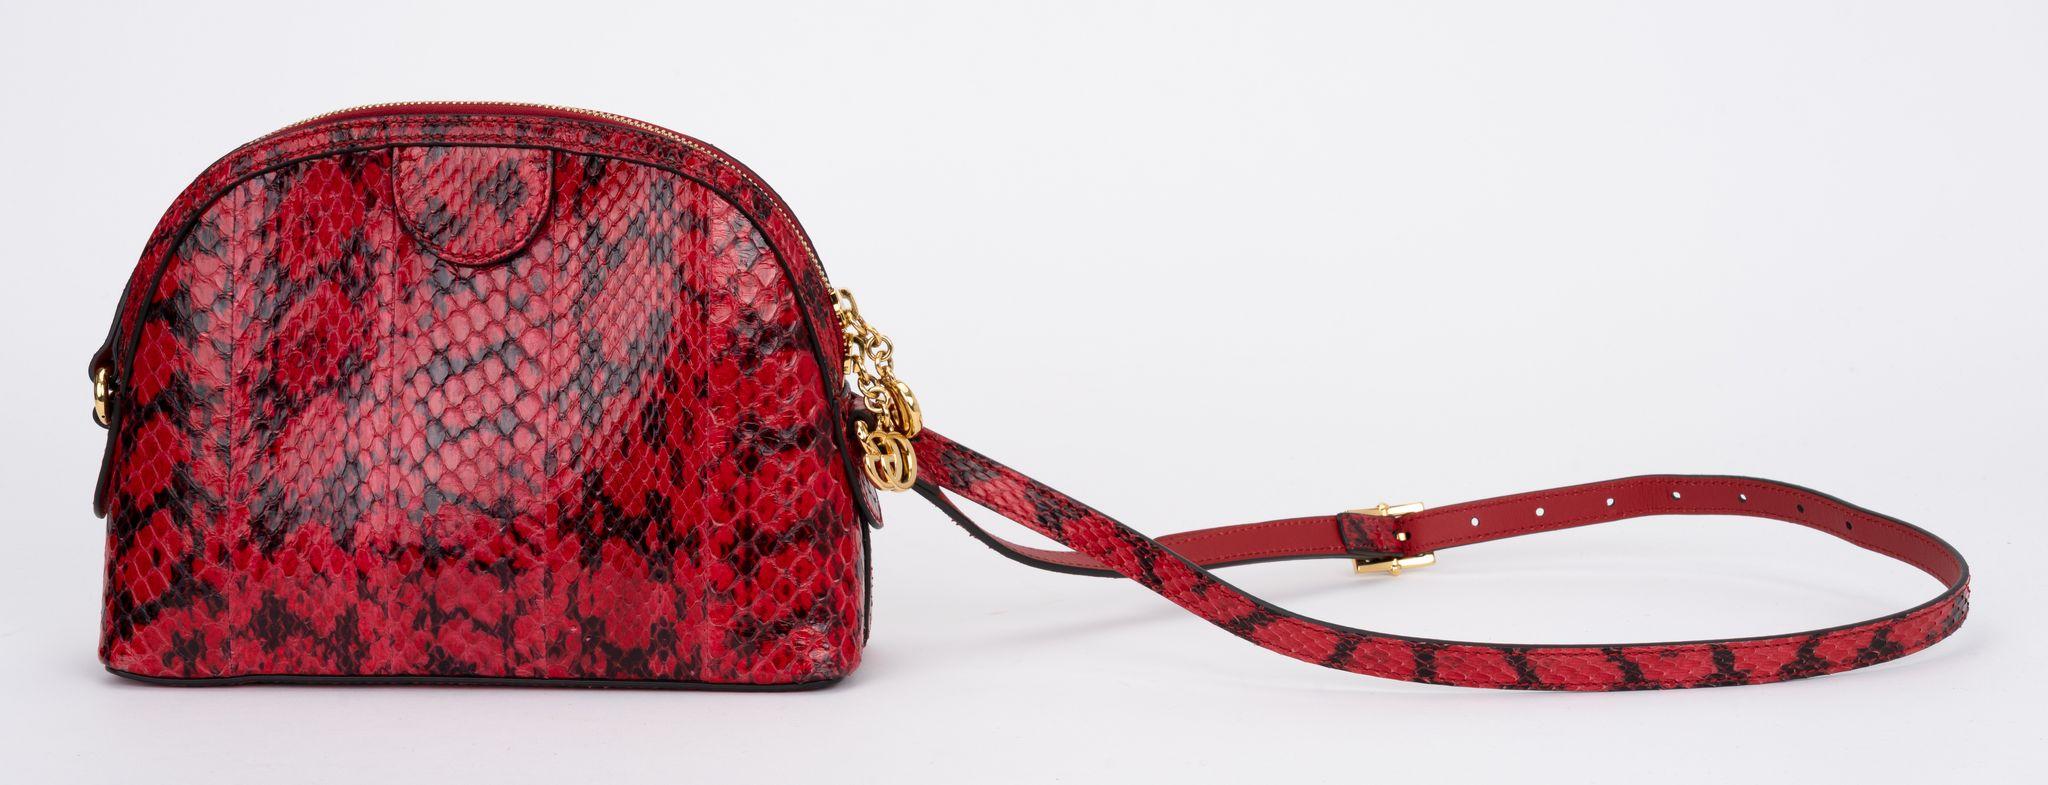 Women's Gucci New Red Water Snake Cross Body Bag For Sale